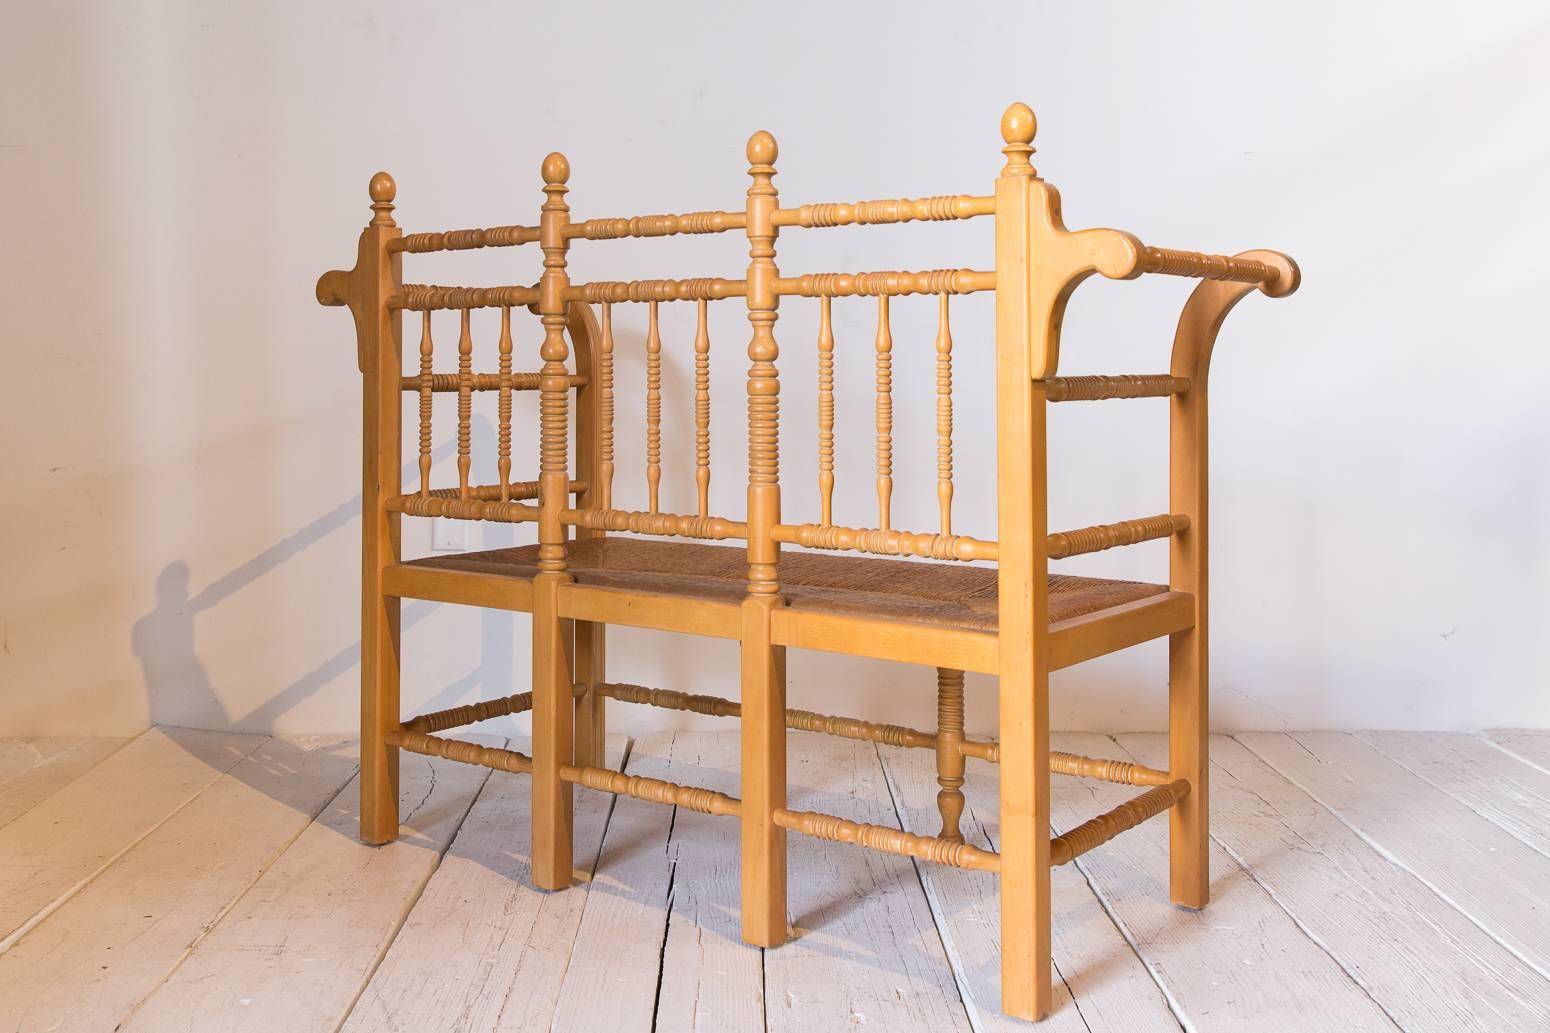 Early 20th Century Edwardian Style Light Oak Spindle Bench with Rush Seat and Curved Arms